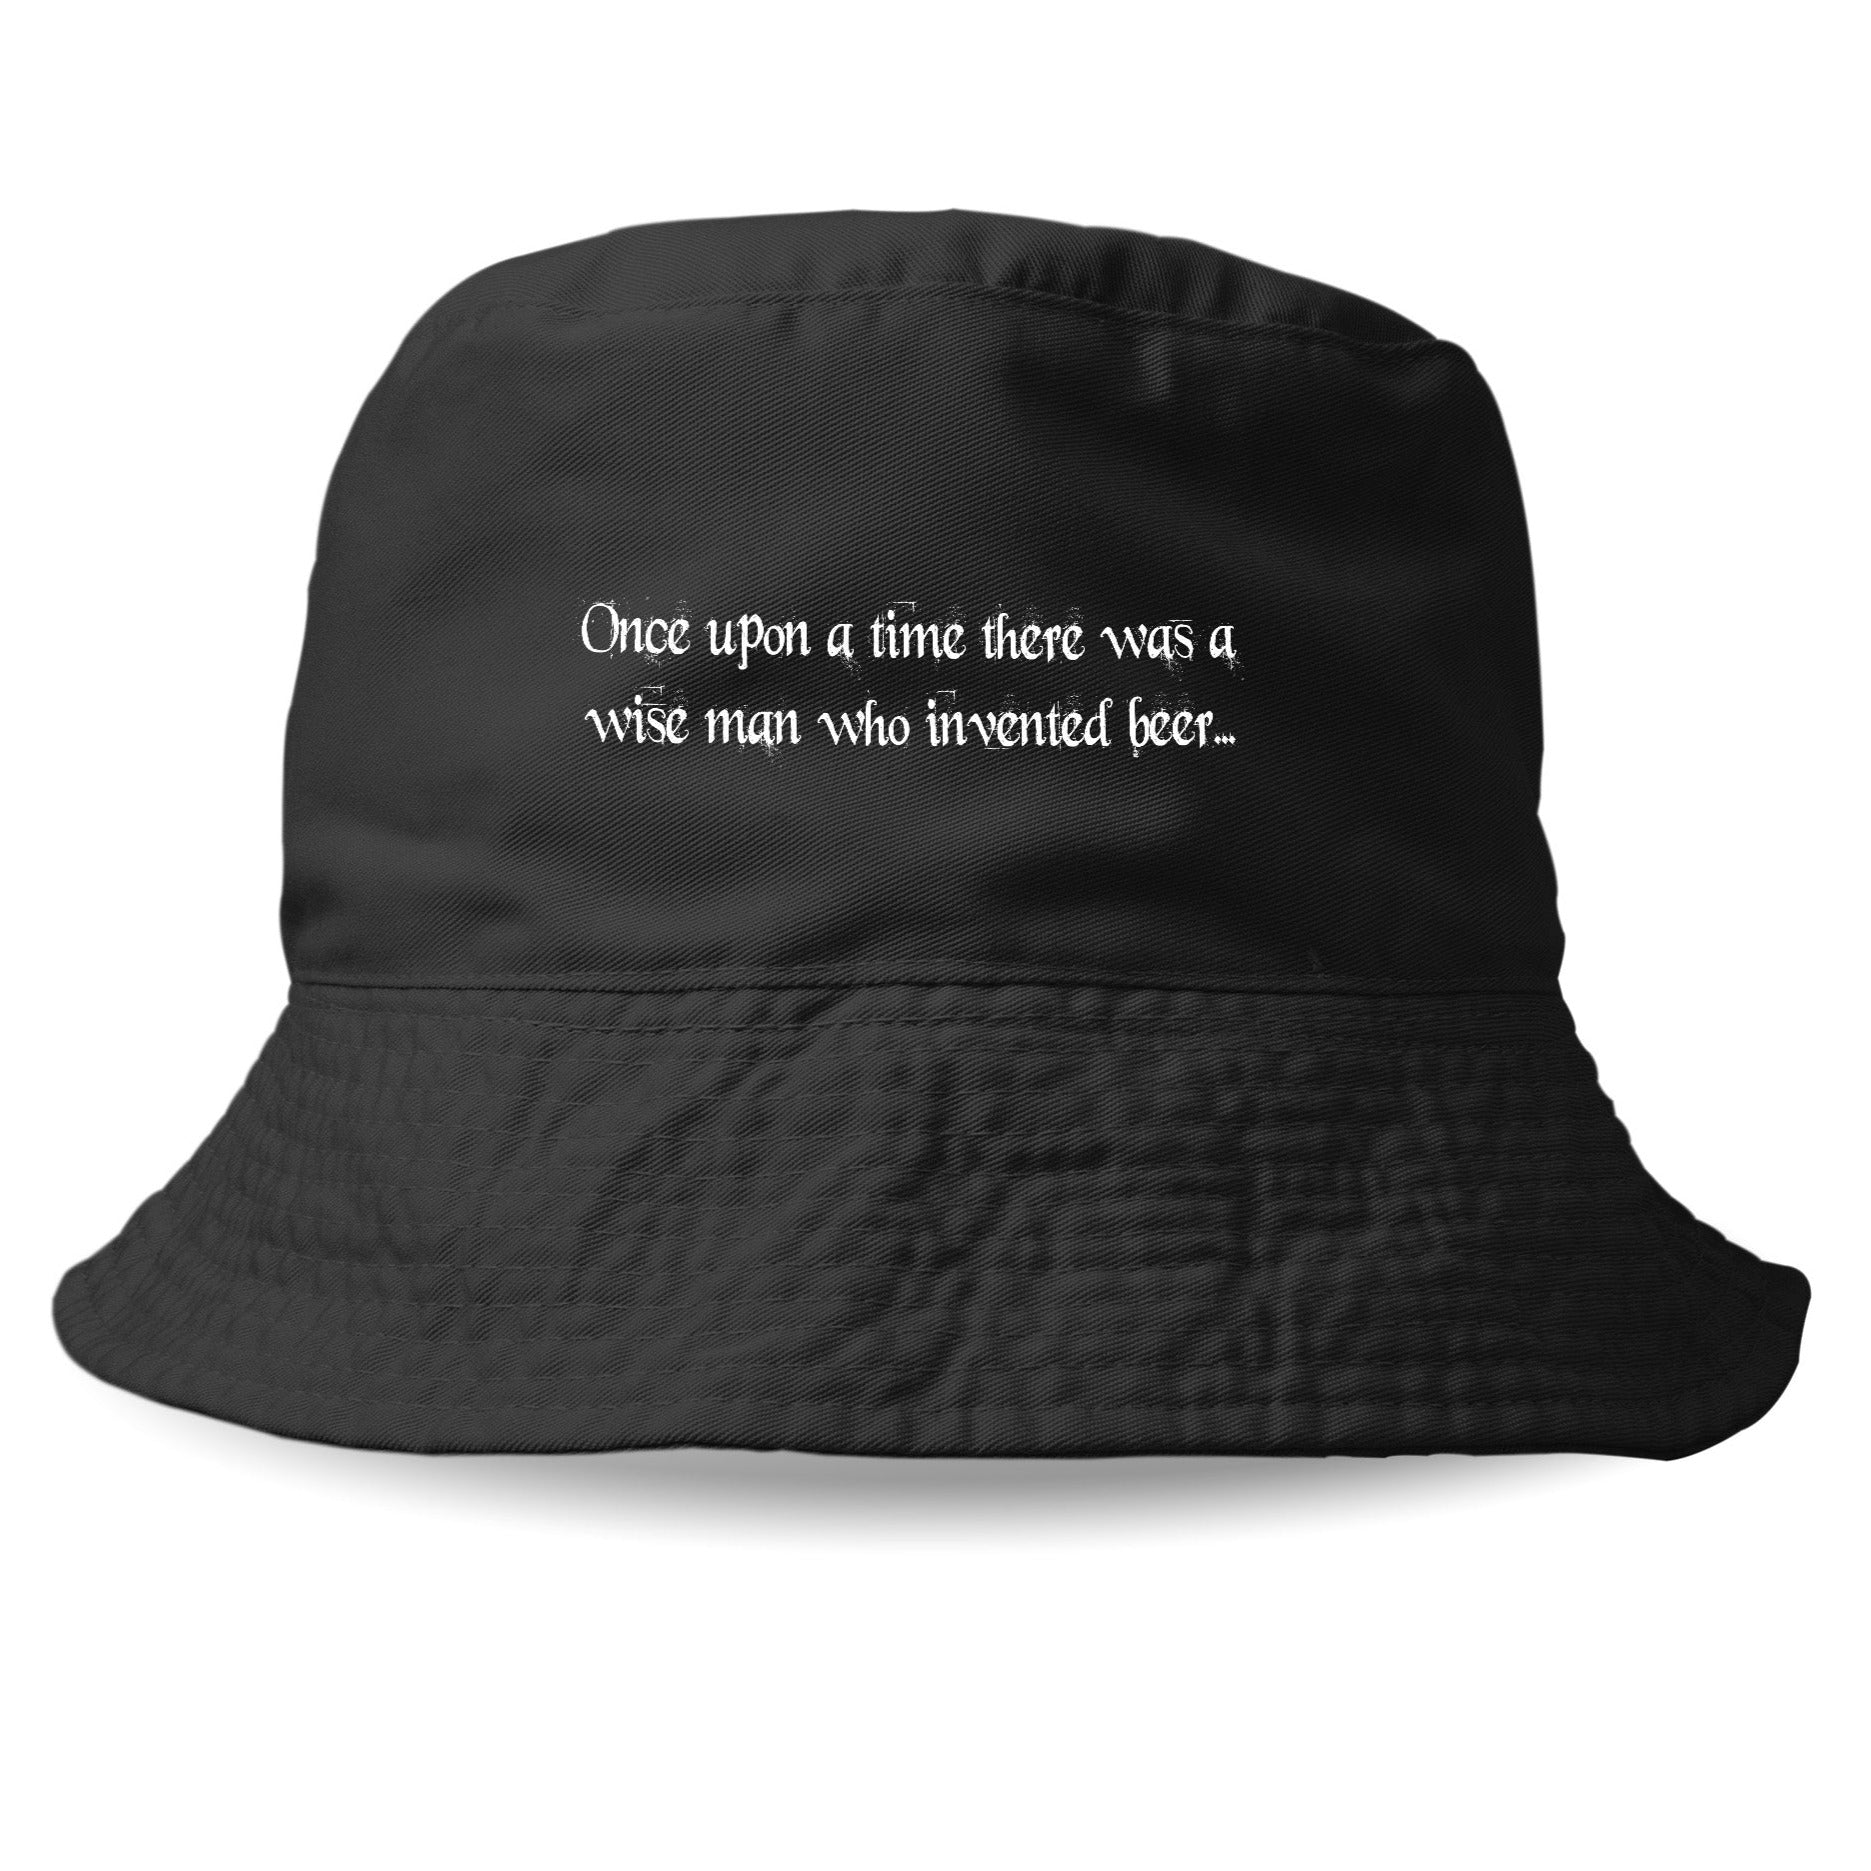 ONCE UPON A TIME - Bucket Hat